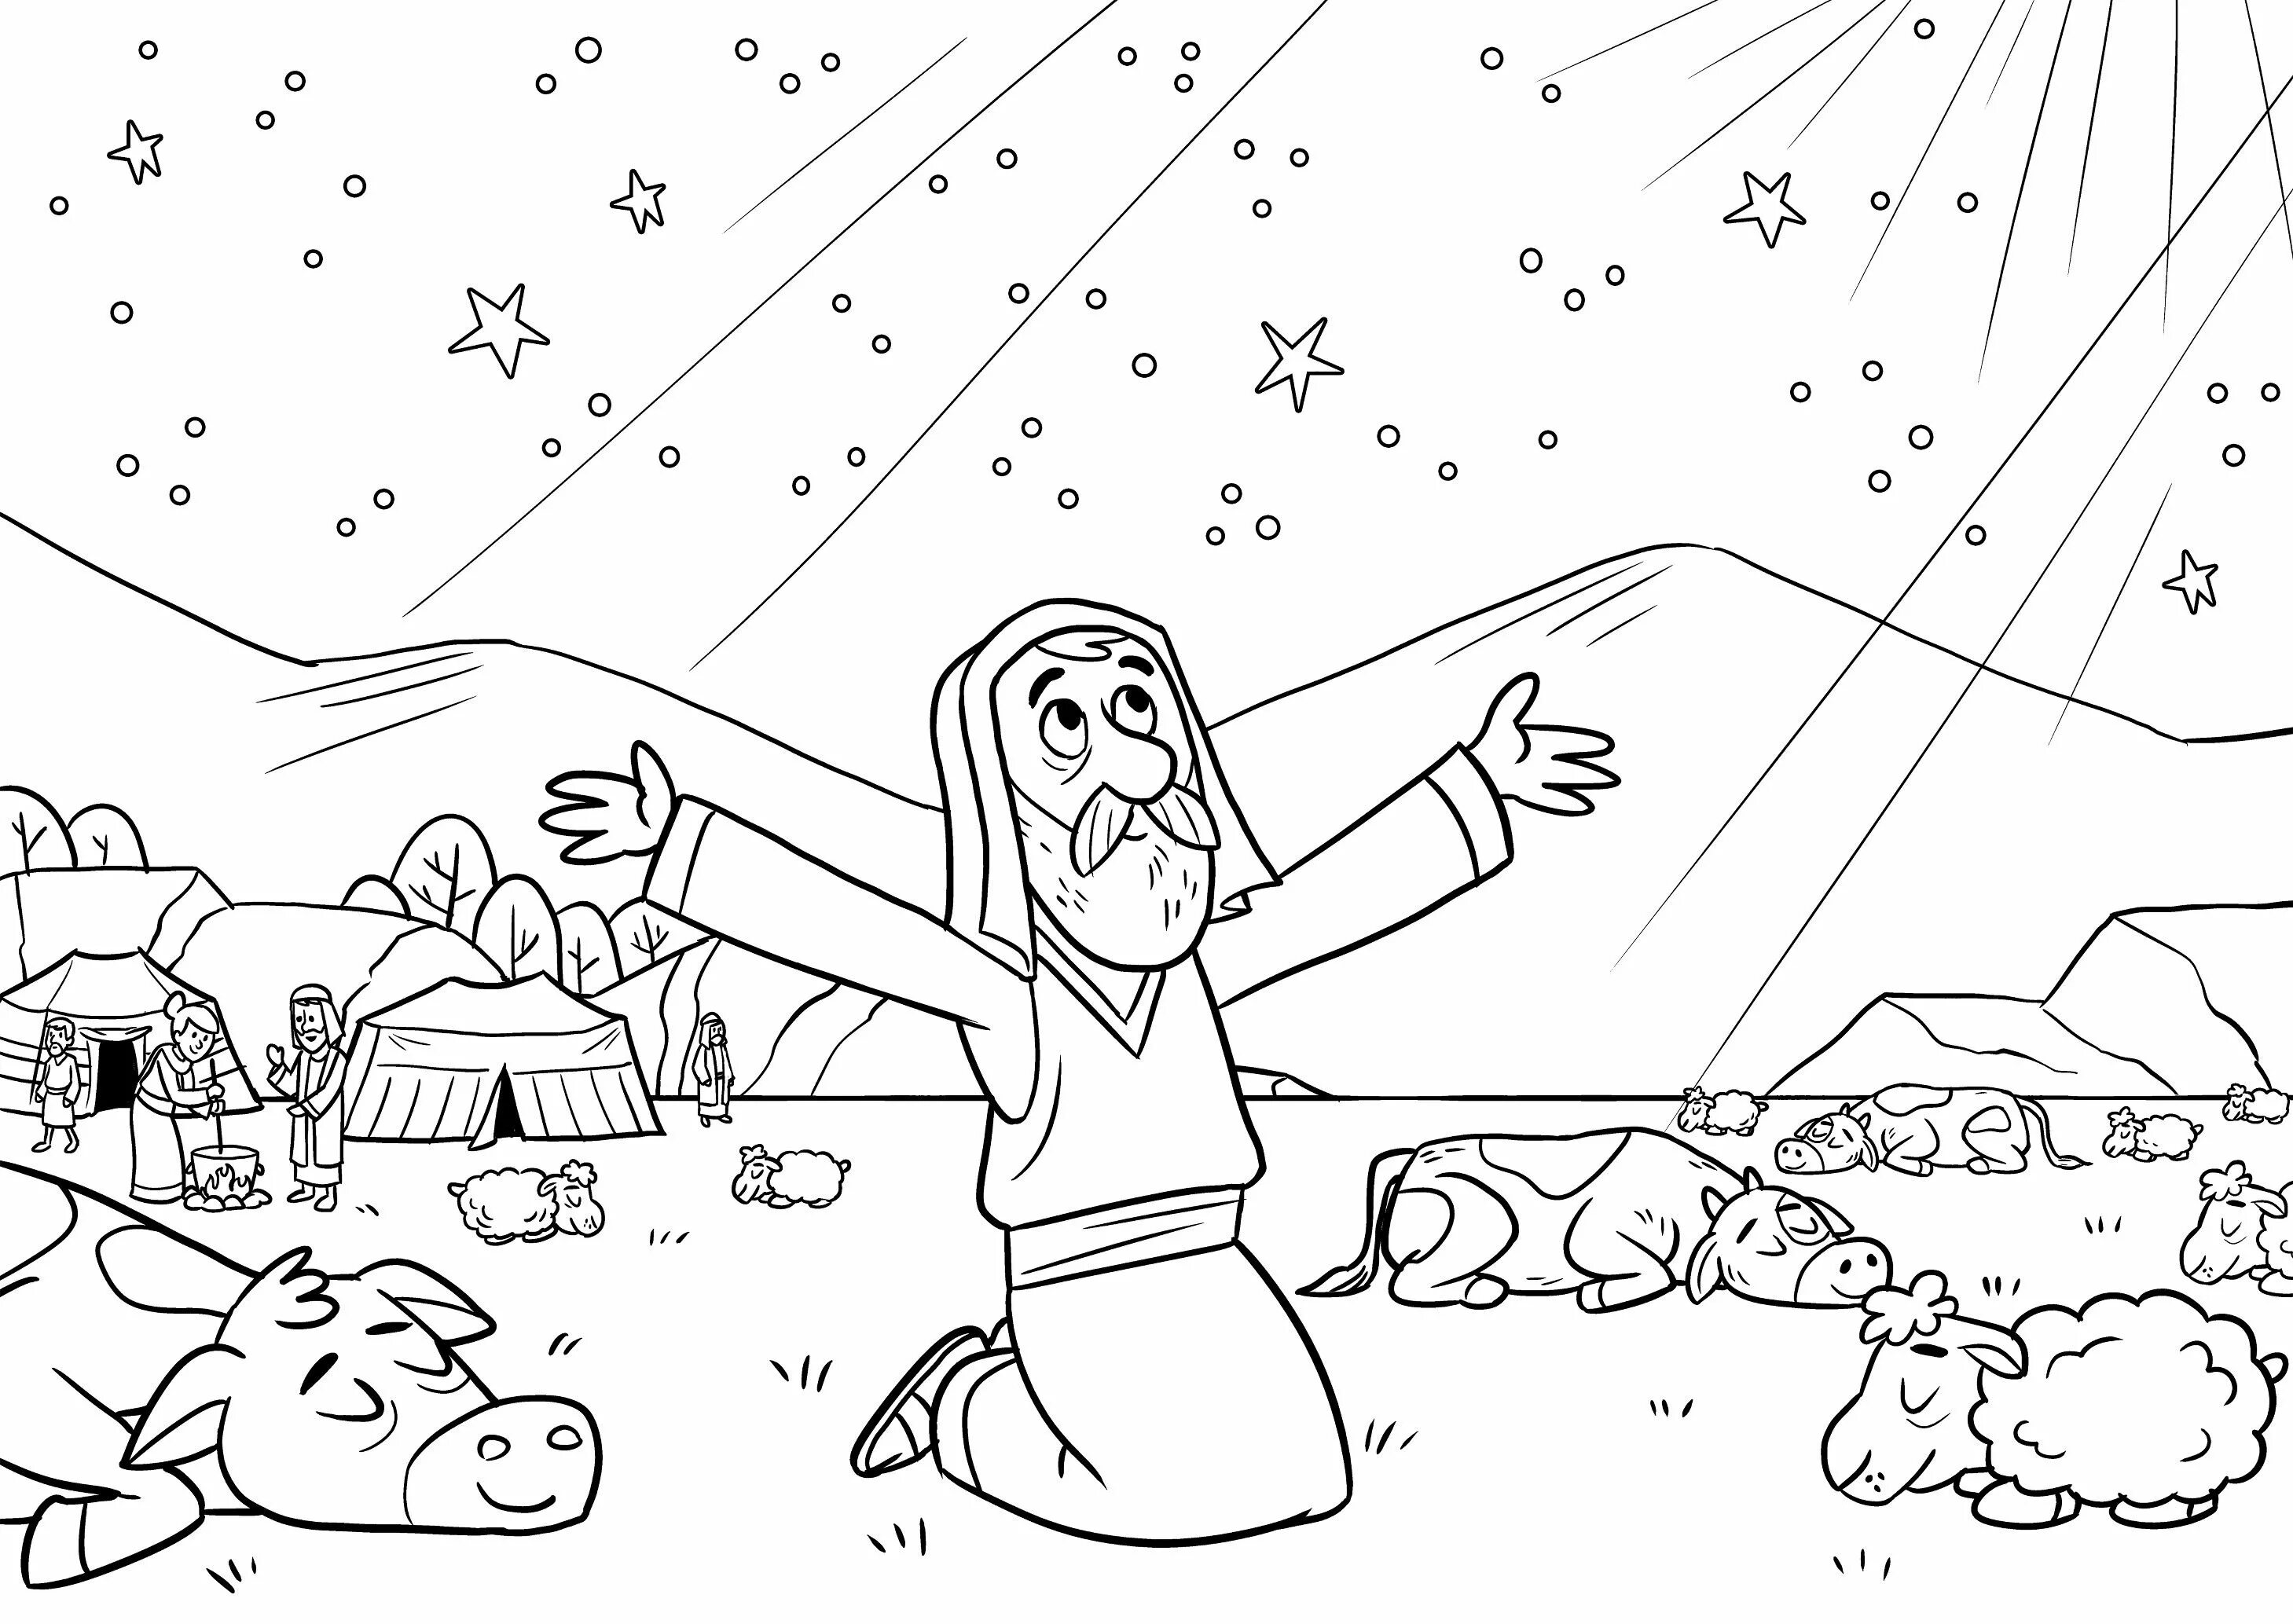 Majestic christian coloring book for kids